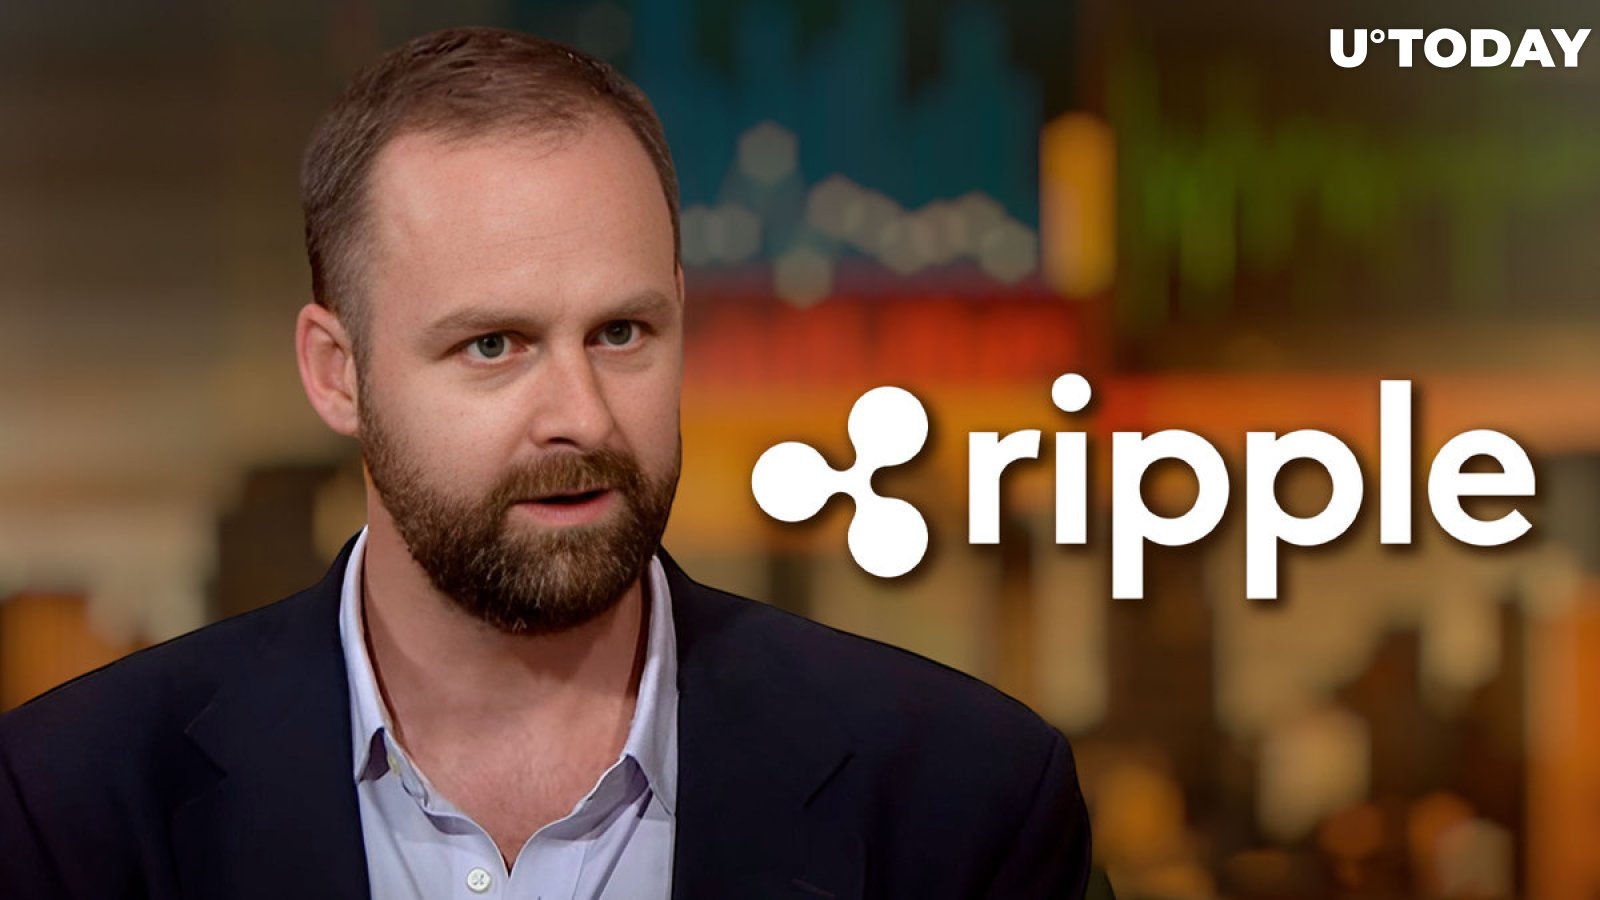 Ripple Lawsuit: Messari CEO Backs Ripple to Beat SEC Despite Being Former Critic